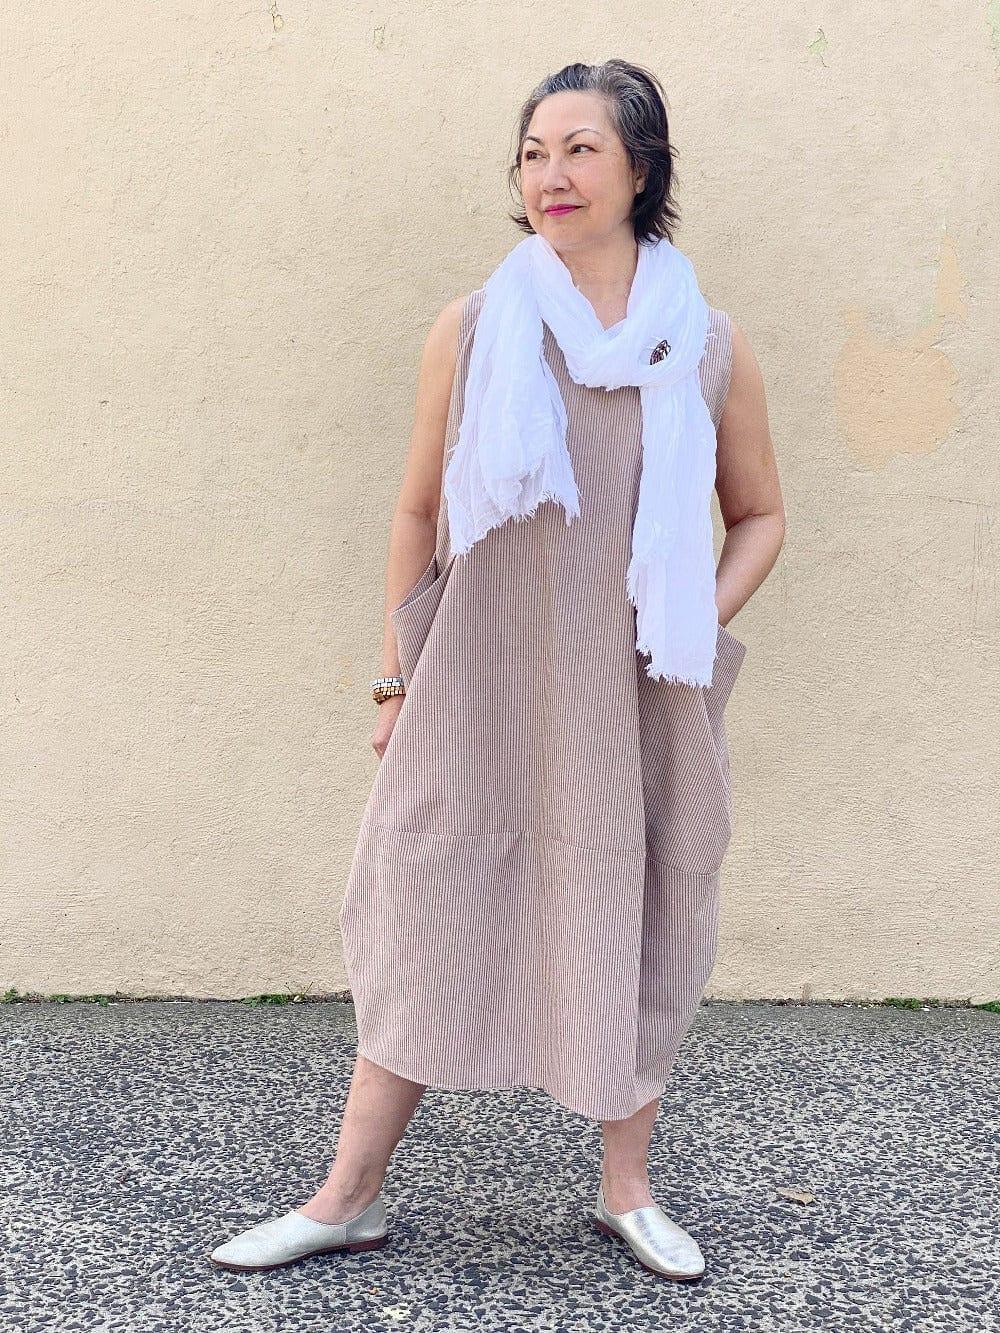 Woman wearing a seersucker white and mocha stripe tank dress with two front pockets and white summer scarf.